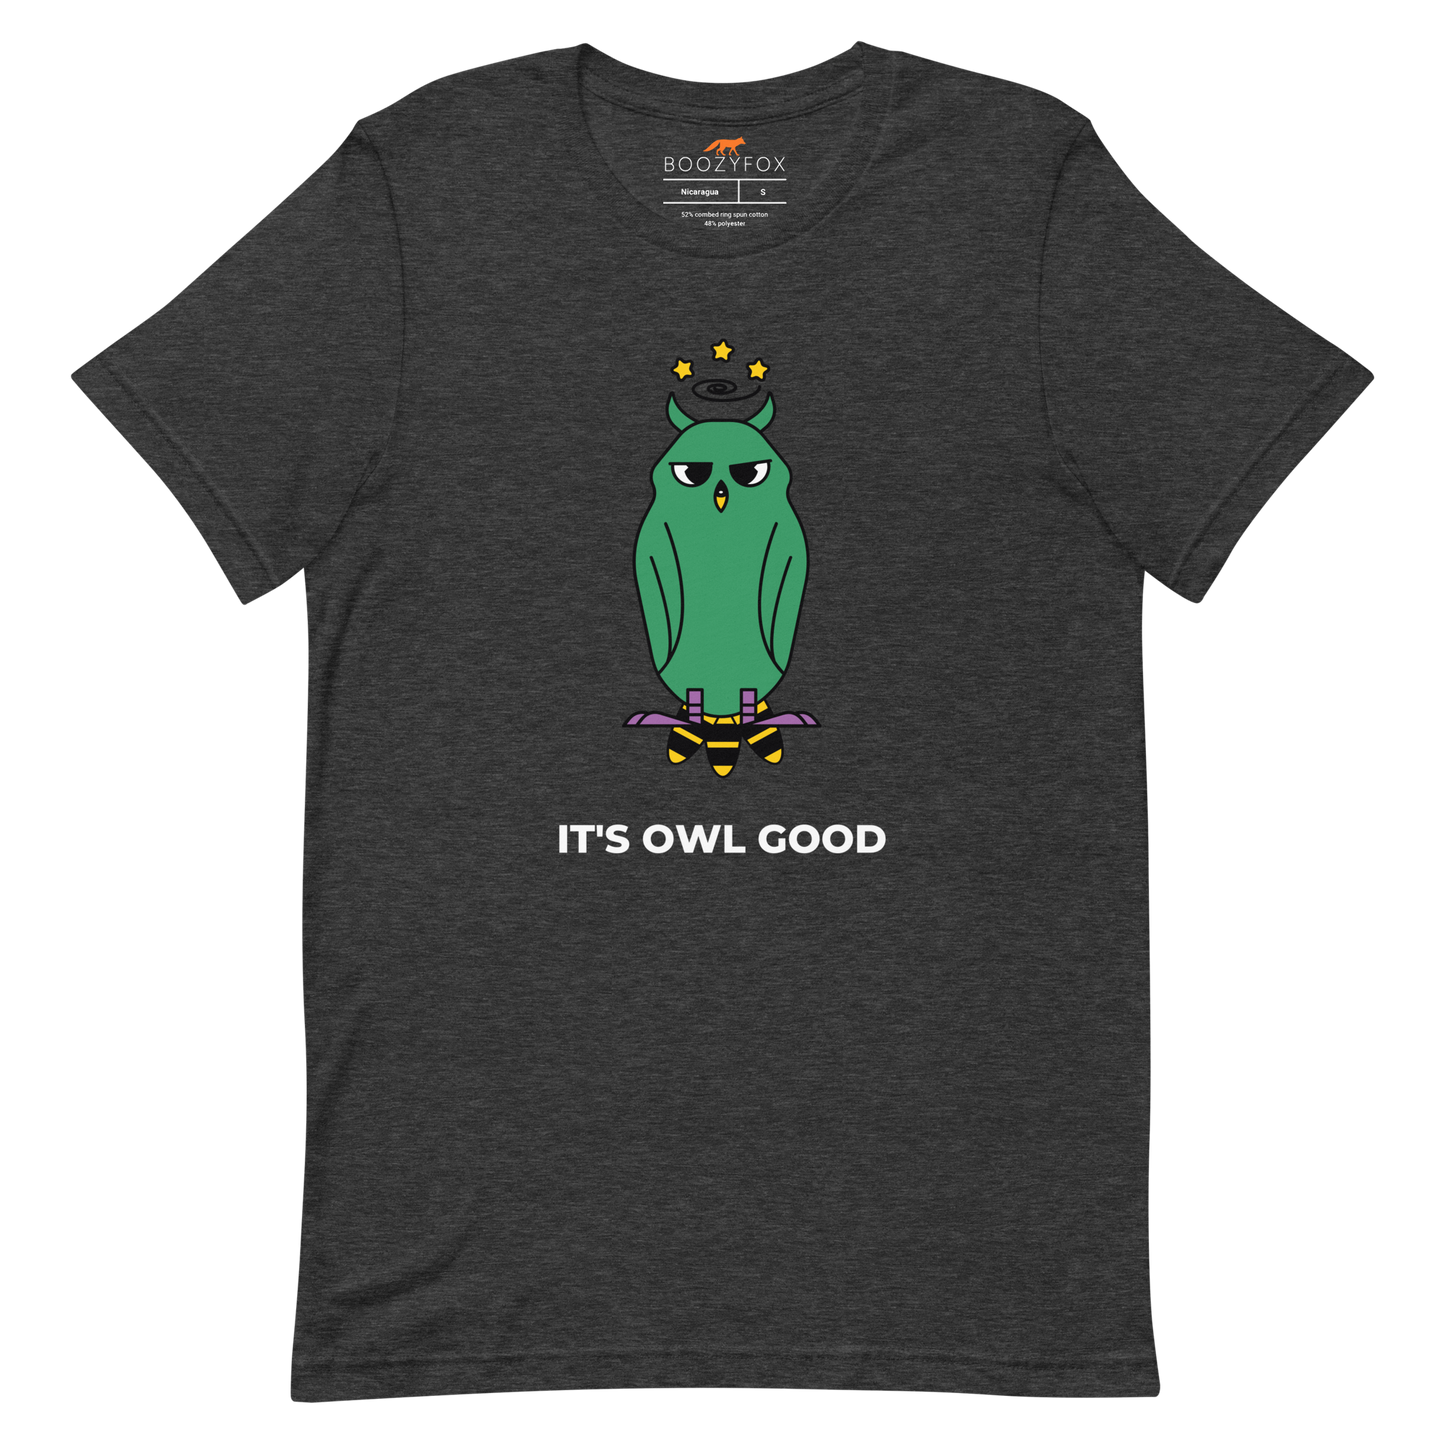 Dark Grey Heather Premium Owl T-Shirt featuring captivating It's Owl Good graphic on the chest - Funny Graphic Owl Tees - Boozy Fox